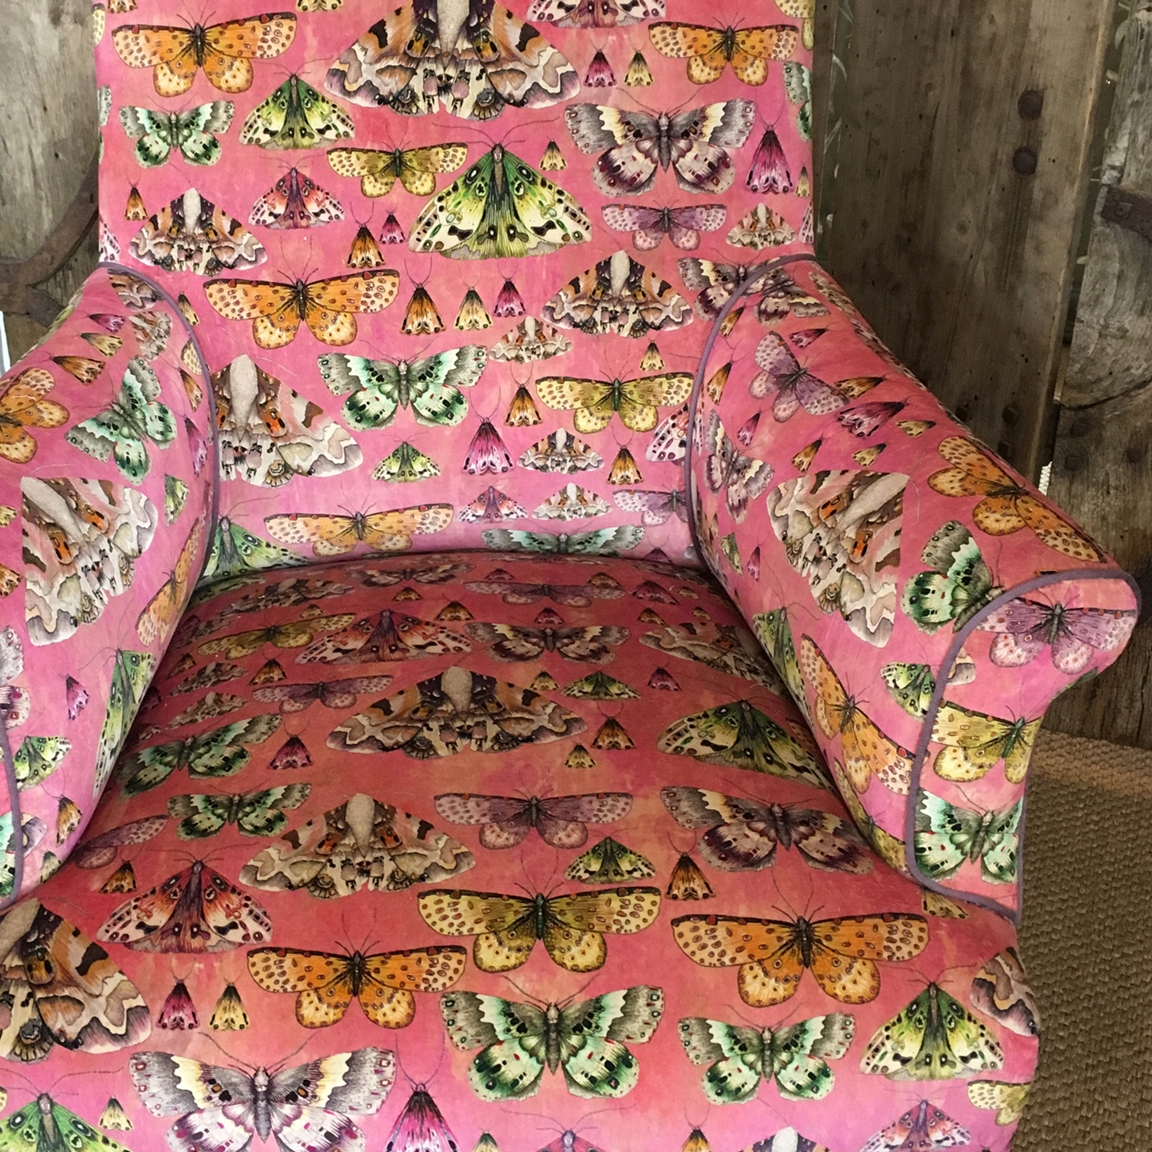 Antique French chair reupholstered in Designers Guild Issoria